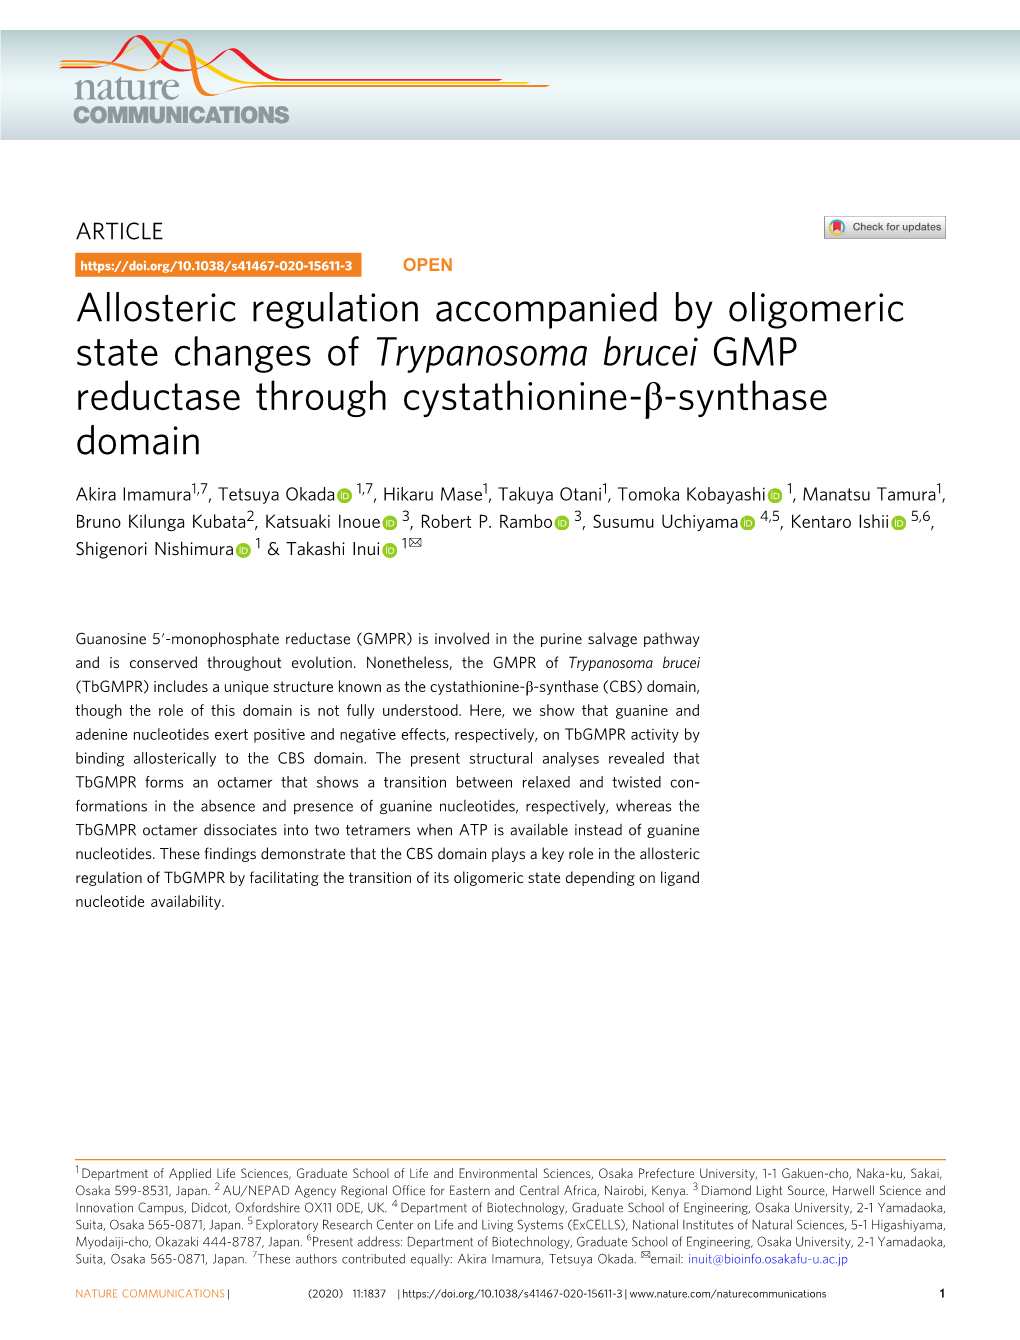 Allosteric Regulation Accompanied by Oligomeric State Changes of Trypanosoma Brucei GMP Reductase Through Cystathionine-Β-Synthase Domain